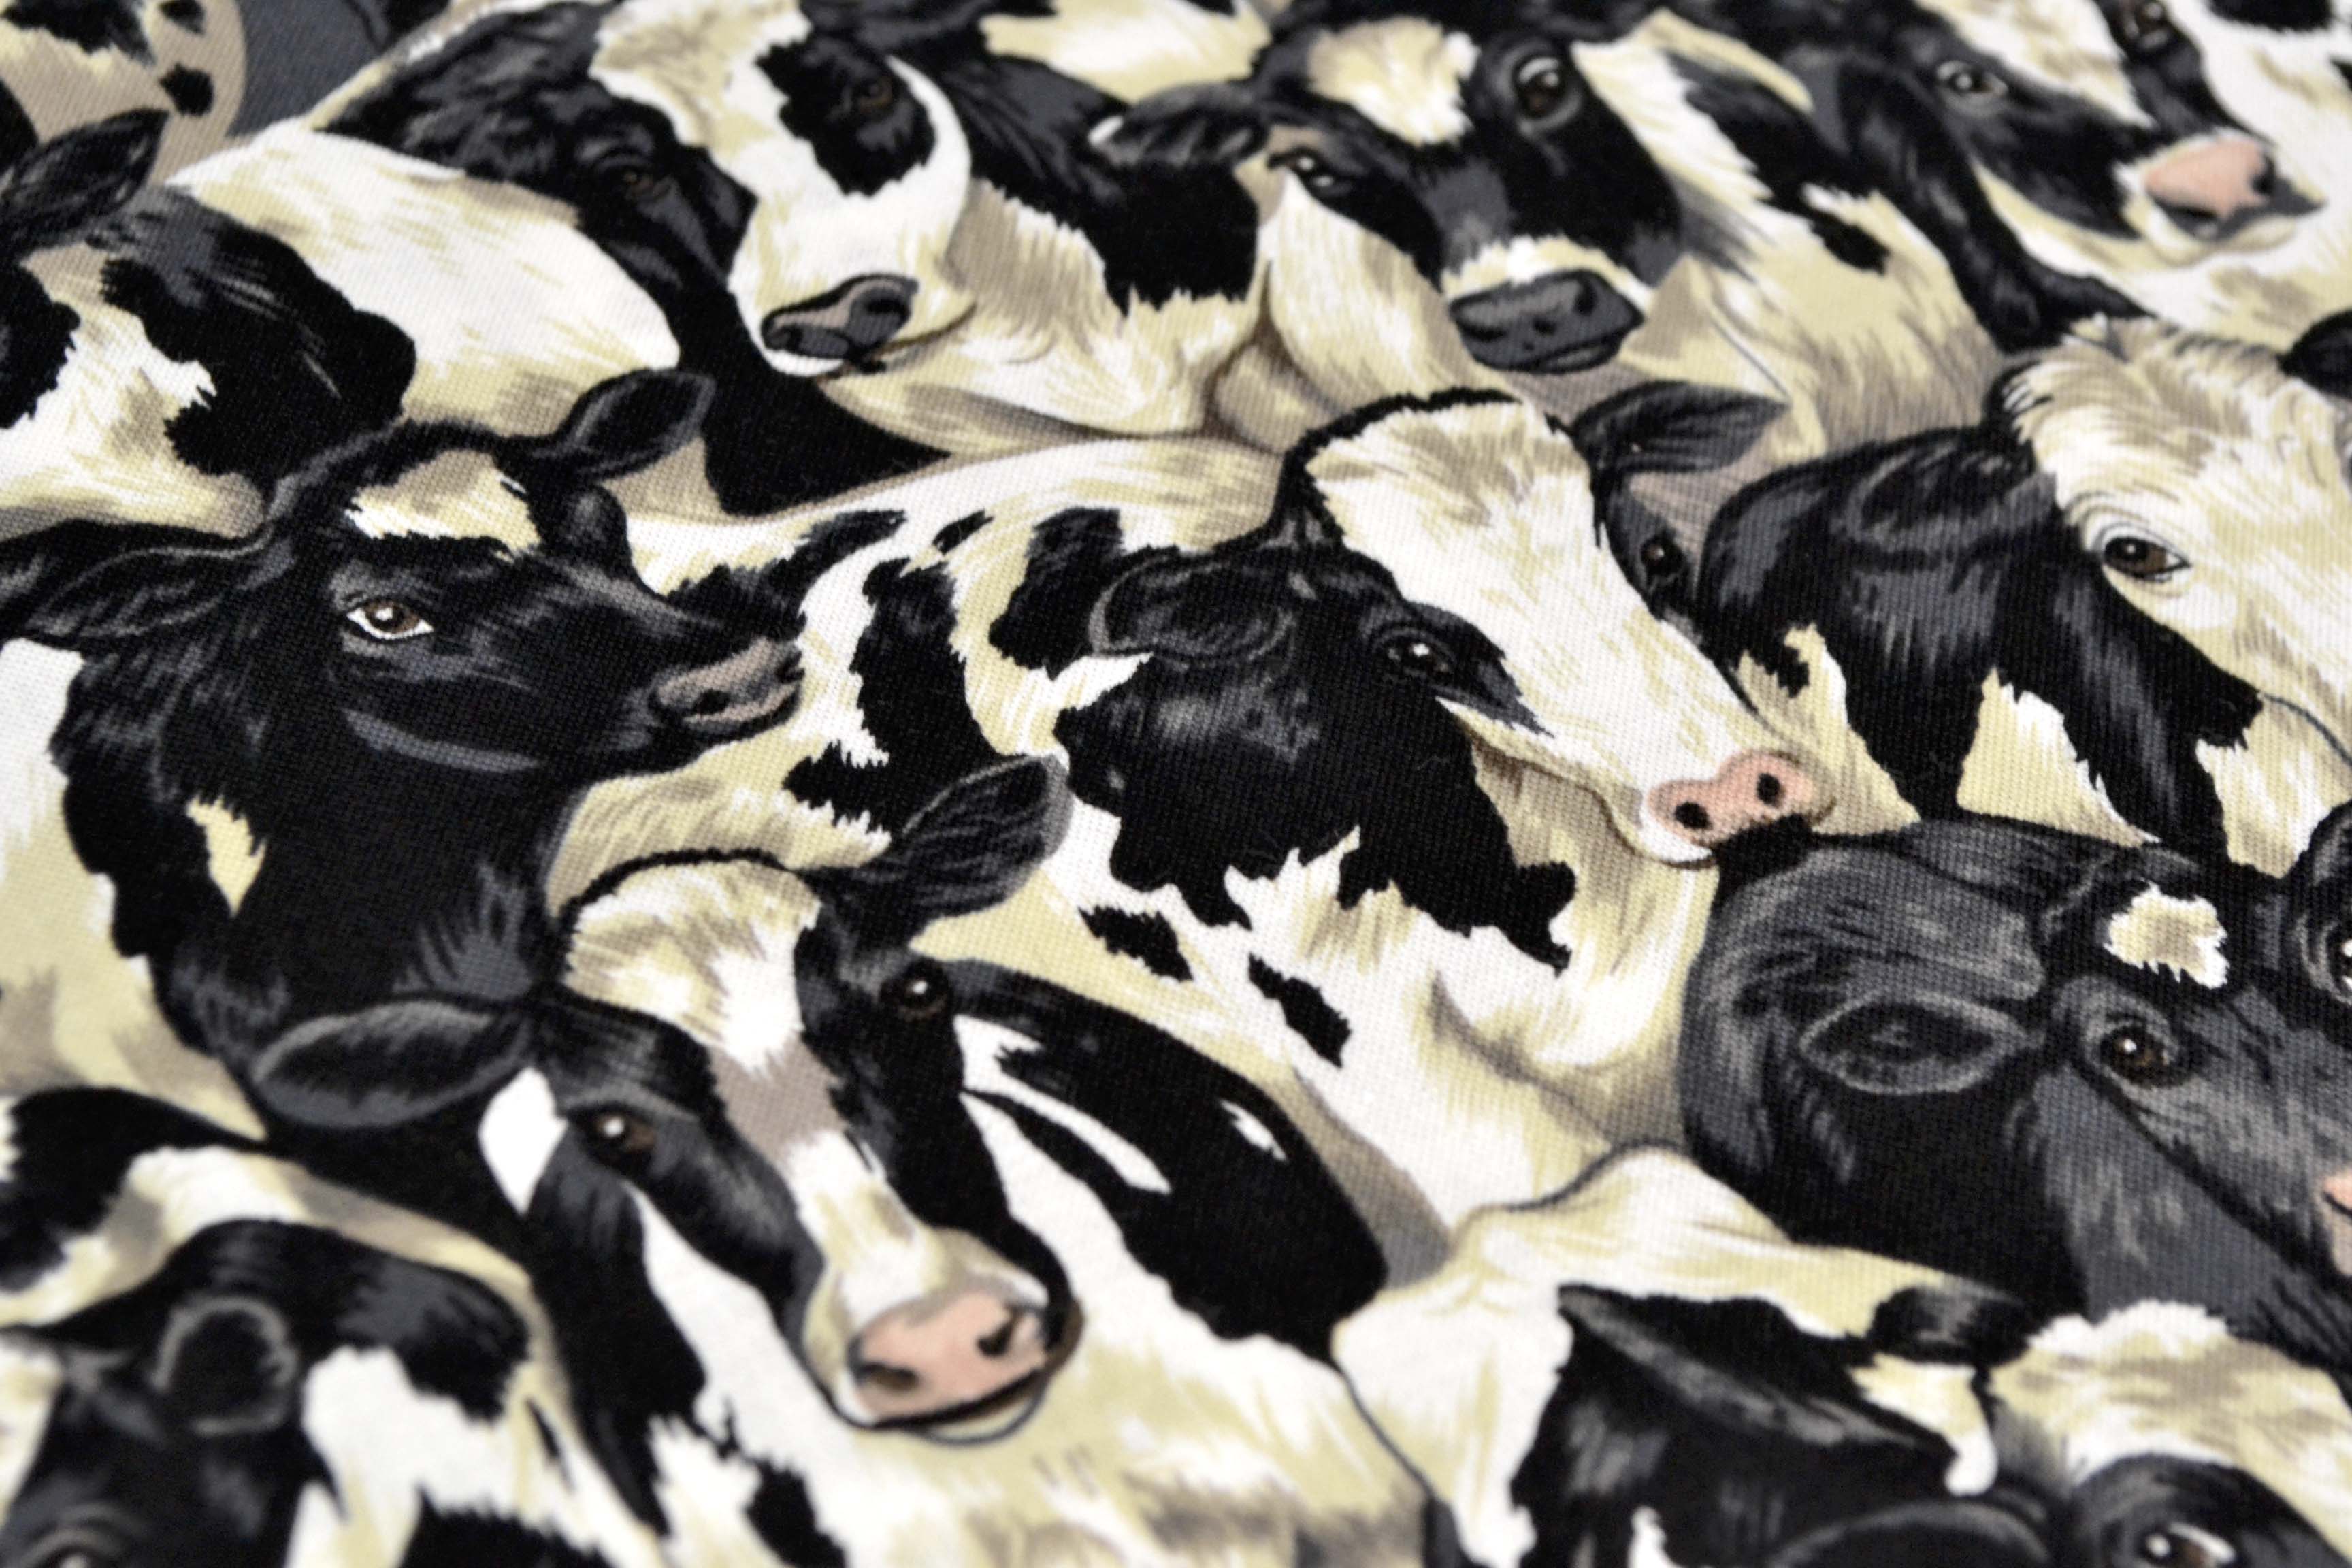 Crowded Cows, Makower